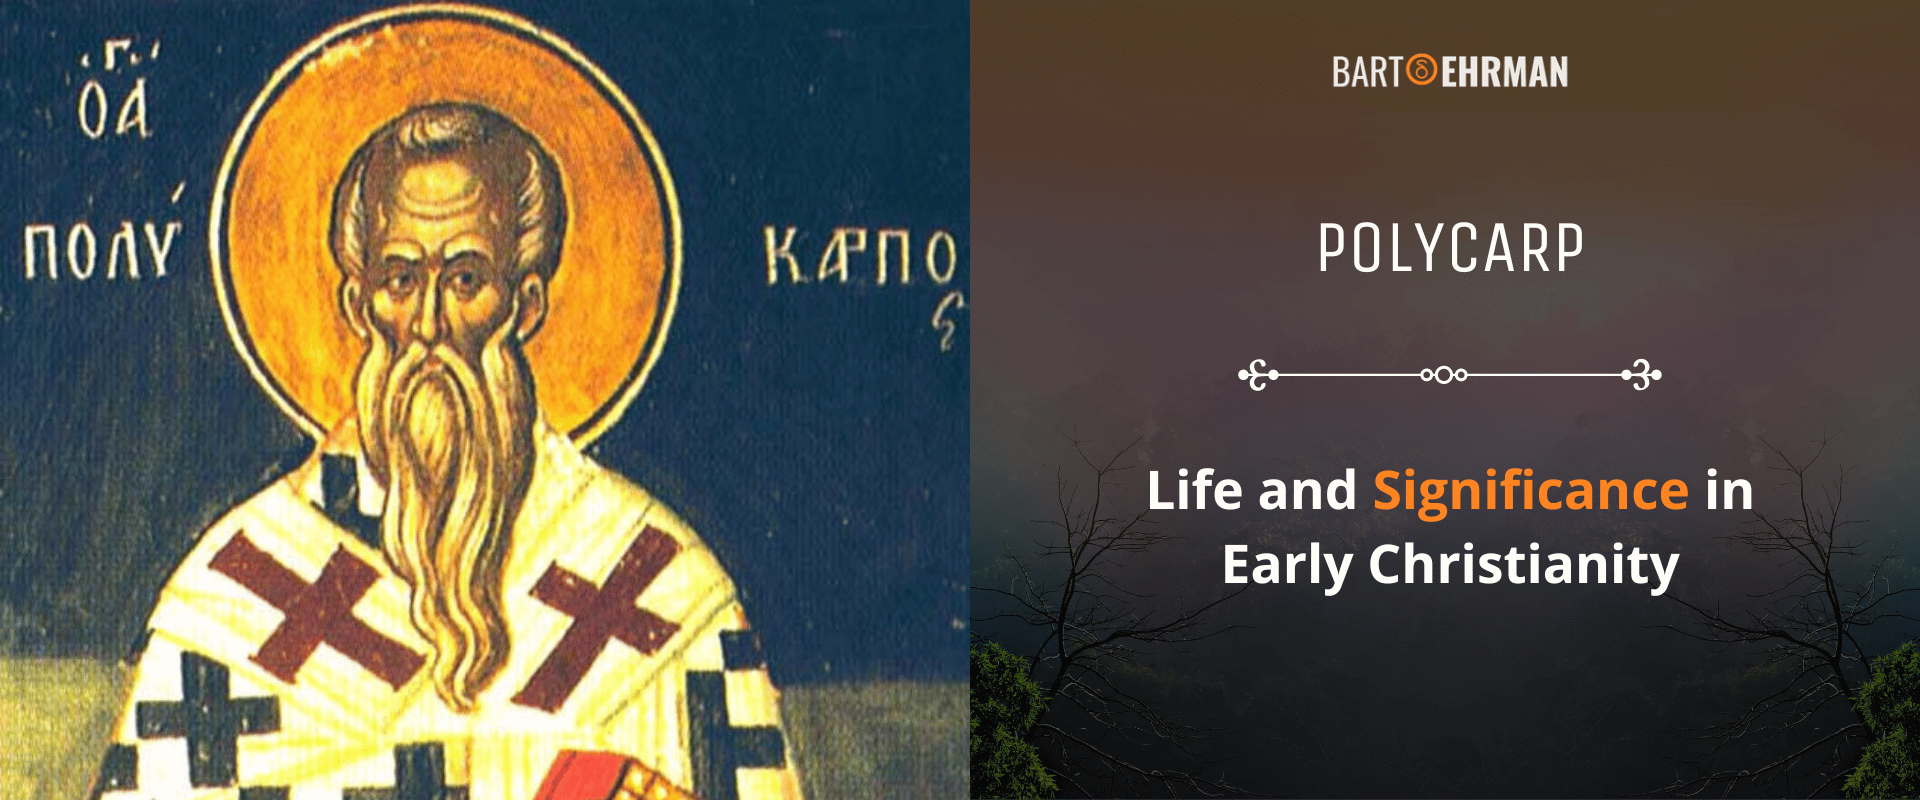 Polycarp - Life and Significance in Early Christianity